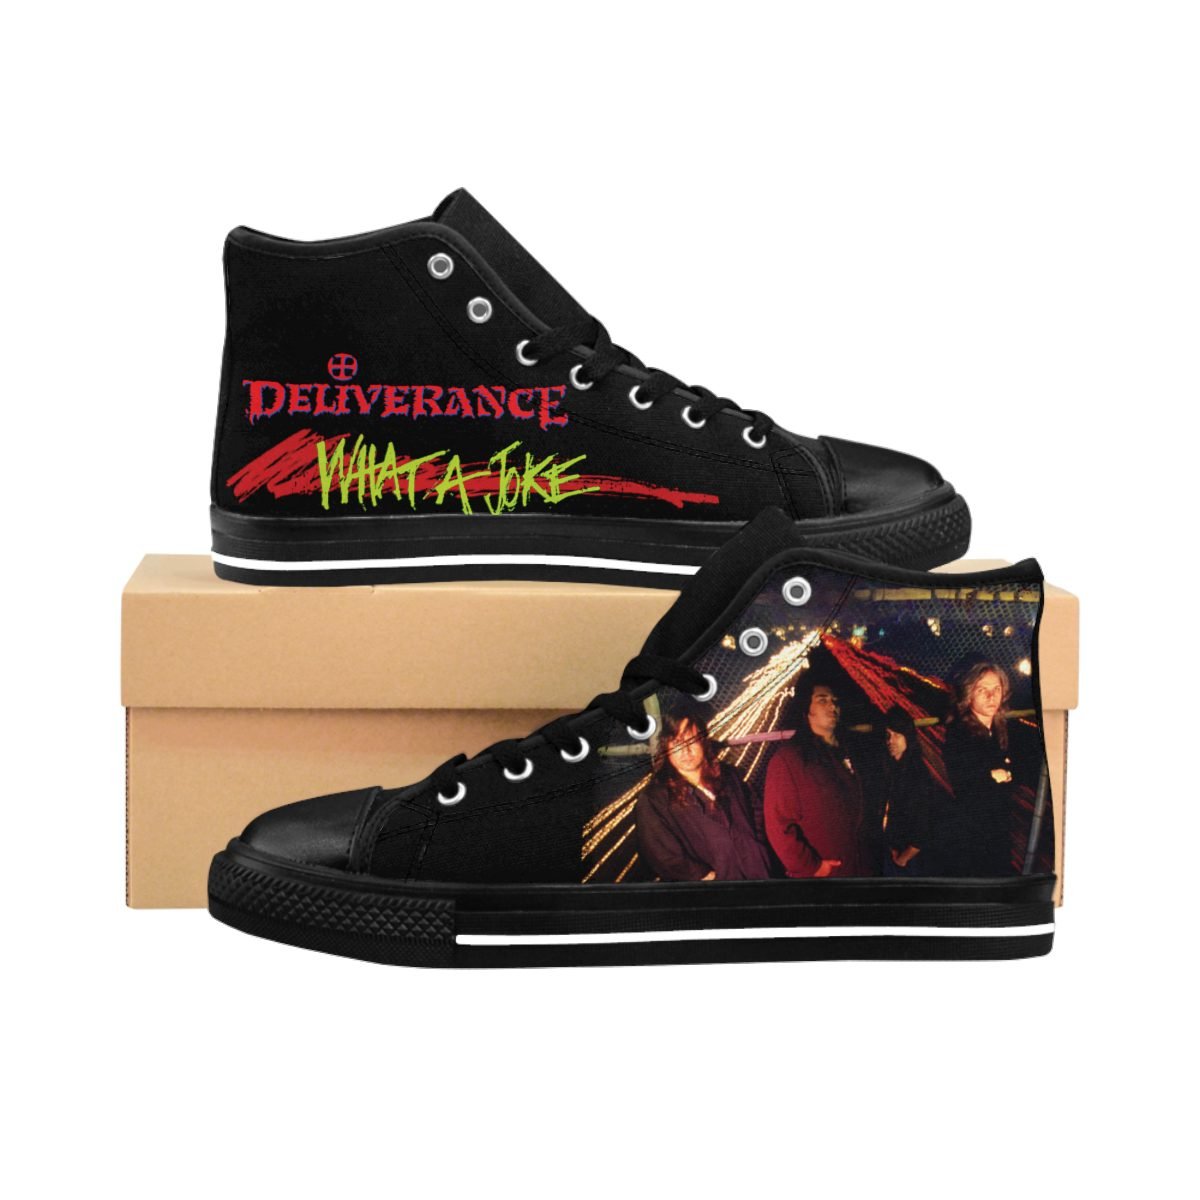 Deliverance – What a Joke Women’s High-top Sneakers